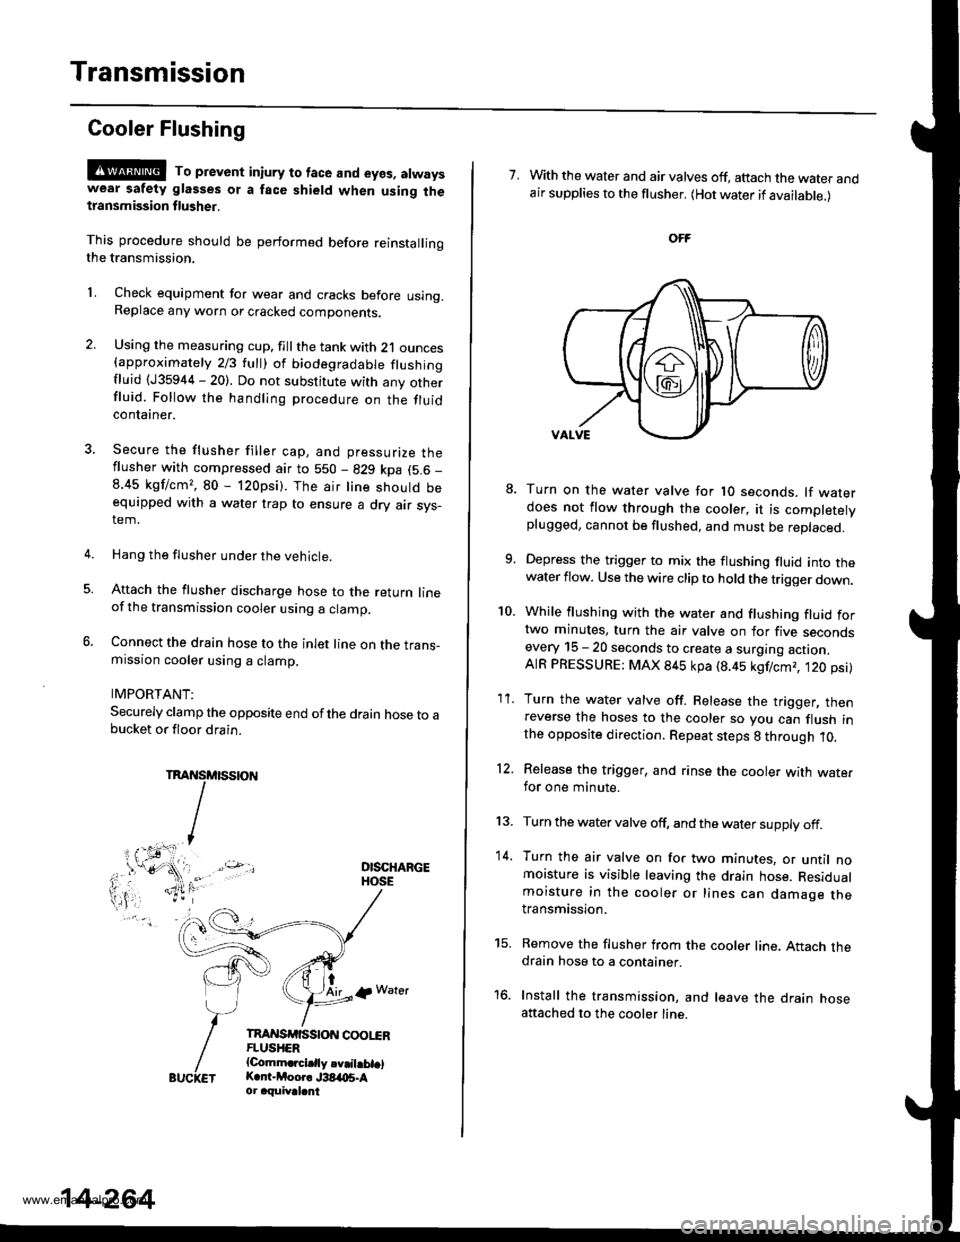 HONDA CR-V 1997 RD1-RD3 / 1.G Service Manual 
Transmission
Cooler Flushing
@@ To prevent in;ury to face and eyos, atwayswear safety glasses ot a face shield when using thetlansmission flusher.
This procedure should be performed before reinstalli